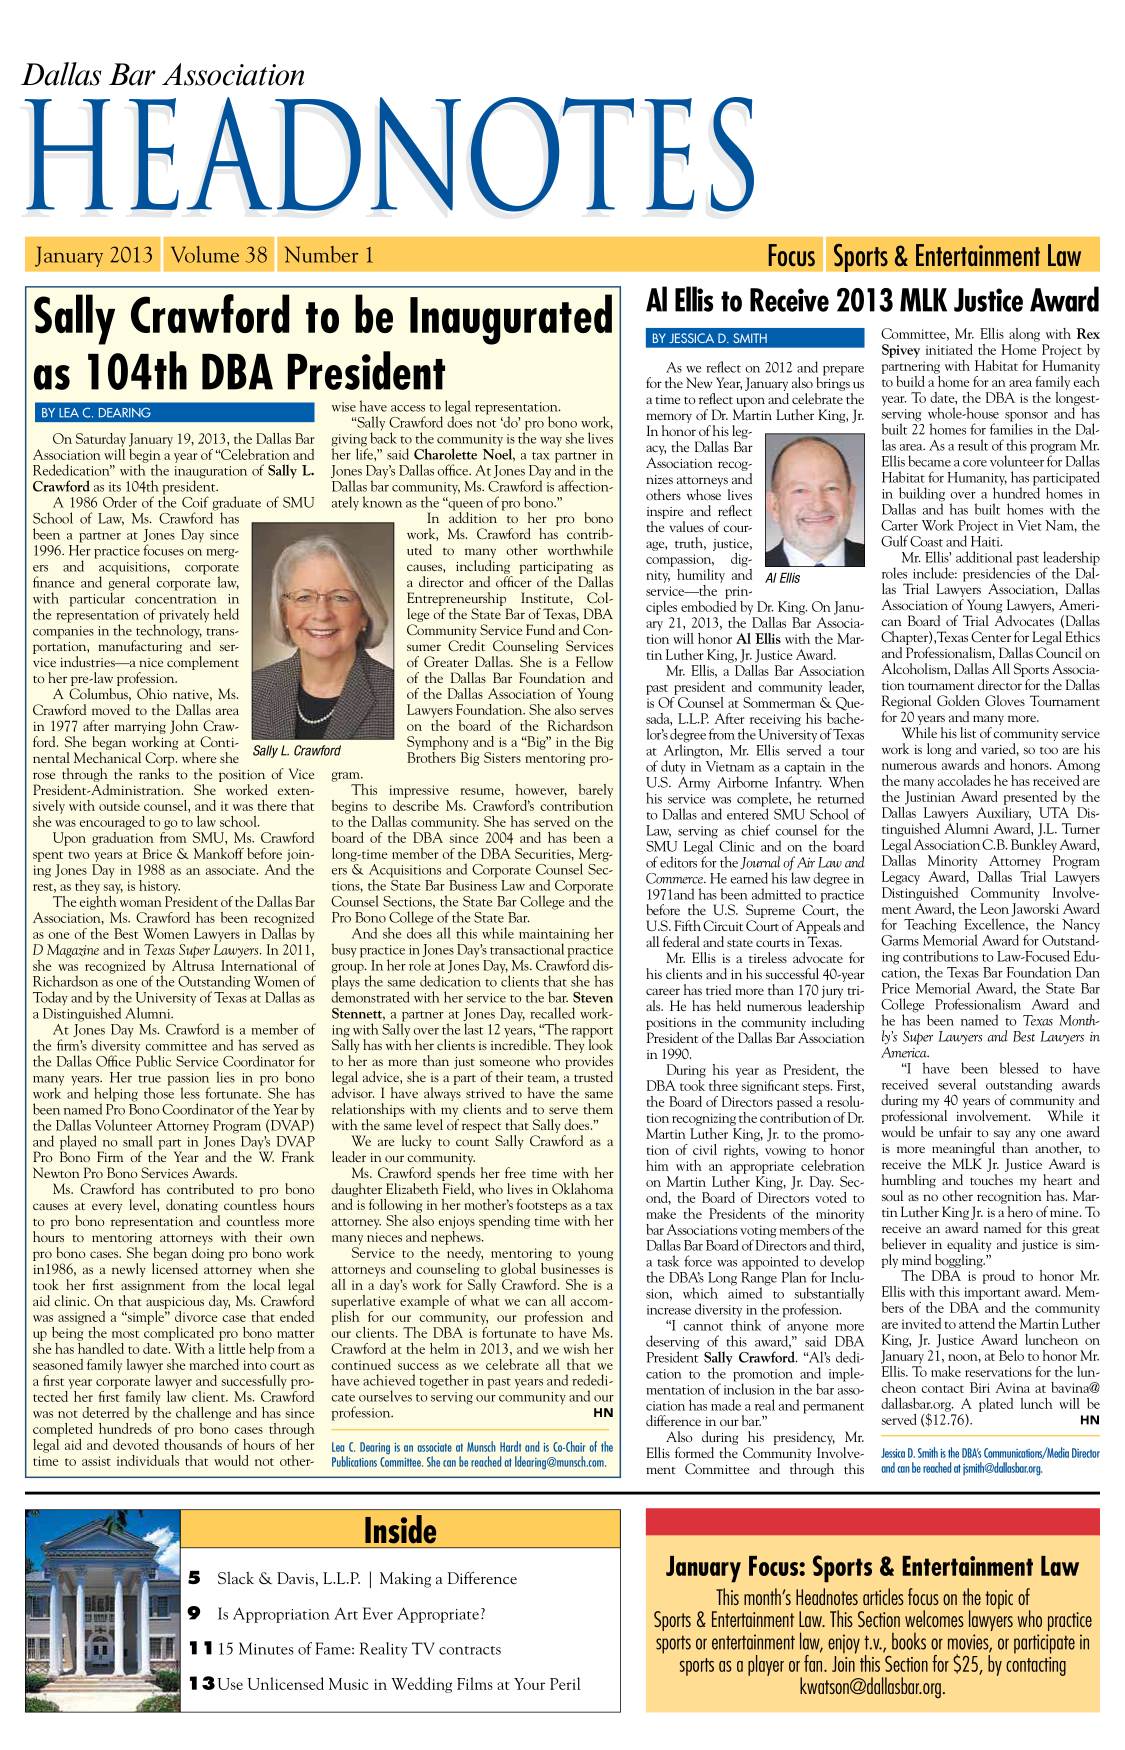 handle is hein.barjournals/hdba0038 and id is 1 raw text is: 



Dallas Bar Association


      . . . ....


Sally Crawford to be Inaugurated


as 104th DBA President


   On Saturday January 19, 2013, the Dallas Bar
Association will begin a year of Celebration and
Rededication with the inauguration of Sally L.
Crawford as its 104th president.
   A 1986 Order of the Coif graduate of SMU
School of Law, Ms. Crawford has
been a partner at Jones Day since
1996. Her practice focuses on merg-
ers and    acquisitions, corporate
finance and general corporate law,
with particular concentration in
the representation of privately held
companies in the technology, trans-
portation, manufacturing and ser-
vice industries-a nice complement
to her pre-law profession.
   A Columbus, Ohio native, Ms.
Crawford moved to the Dallas area
in 1977 after marrying John Craw-
ford. She began working at Conti-   Sa
nental Mechanical Corp. where sheSaly L. Gravy
rose through the ranks to the position of Vice
President-Administration. She worked exten-
sively with outside counsel, and it was there that
she was encouraged to go to law school.
   Upon graduation from SMU, Ms. Crawford
spent two years at Brice & Mankoff before join-
ing Jones Day in 1988 as an associate. And the
rest, as they say, is history.
   The eighth woman President of the Dallas Bar
Association, Ms. Crawford has been recognized
as one of the Best Women Lawyers in Dallas by
D Magazine and in Texas Super Lawyers. In 2011,
she was recognized by Altrusa International of
Richardson as one of the Outstanding Women of
Today and by the University of Texas at Dallas as
a Distinguished Alumni.
   At Jones Day Ms. Crawford is a member of
the firm's diversity committee and has served as
the Dallas Office Public Service Coordinator for
many years. Her true passion lies in pro bono
work and helping those less fortunate. She has
been named Pro Bono Coordinator of the Year by
the Dallas Volunteer Attorney Program (DVAP)
and played no small part in Jones Day's DVAP
Pro Bono Firm of the Year and the W. Frank
Newton Pro Bono Services Awards.
   Ms. Crawford has contributed to pro bono
causes at every level, donating countless hours
to pro bono representation and countless more
hours to mentoring attorneys with their own
pro bono cases. She began doing pro bono work
in1986, as a newly licensed attorney when she
took her first assignment from the local legal
aid clinic. On that auspicious day, Ms. Crawford
was assigned a simple divorce case that ended
up being the most complicated pro bono matter
she has handled to date. With a little help from a
seasoned family lawyer she marched into court as
a first year corporate lawyer and successfully pro-
tected her first family law client. Ms. Crawford
was not deterred by the challenge and has since
completed hundreds of pro bono cases through
legal aid and devoted thousands of hours of her
time to assist individuals that would not other-


wise have access to legal representation.
    Sally Crawford does not 'do' pro bono work,
giving back to the community is the way she lives
her life, said Charolette Noel, a tax partner in
Jones Day's Dallas office. At Jones Day and in the
Dallas bar community, Ms. Crawford is affection-
ately known as the queen of pro bono.
                In addition to her pro bono
             work, Ms. Crawford has contrib-
             uted to many other worthwhile
             causes, including participating as
             a director and officer of the Dallas
             Entrepreneurship  Institute, Col-
             lege of the State Bar of Texas, DBA
             Community Service Fund and Con-
             sumer Credit Counseling Services
             of Greater Dallas. She is a Fellow
             of the Dallas Bar Foundation and
             of the Dallas Association of Young
             Lawyers Foundation. She also serves
             on the board of the Richardson
             Symphony and is a Big in the Big
9rd          Brothers Big Sisters mentoring pro-
gram.
   This impressive resume, however, barely
begins to describe Ms. Crawford's contribution
to the Dallas community. She has served on the
board of the DBA since 2004 and has been a
long-time member of the DBA Securities, Merg-
ers & Acquisitions and Corporate Counsel Sec-
tions, the State Bar Business Law and Corporate
Counsel Sections, the State Bar College and the
Pro Bono College of the State Bar.
    And she does all this while maintaining her
busy practice in Jones Day's transactional practice
group. In her role at Jones Day, Ms. Crawford dis-
plays the same dedication to clients that she has
demonstrated with her service to the bar. Steven
Stennett, a partner at Jones Day, recalled work-
ing with Sally over the last 12 years, The rapport
Sally has with her clients is incredible. They look
to her as more than just someone who provides
legal advice, she is a part of their team, a trusted
advisor. I have always strived to have the same
relationships with my clients and to serve them
with the same level of respect that Sally does.
   We are lucky to count Sally Crawford as a
leader in our community.
    Ms. Crawford spends her free time with her
daughter Elizabeth Field, who lives in Oklahoma
and is following in her mother's footsteps as a tax
attorney. She also enjoys spending time with her
many nieces and nephews.
    Service to the needy, mentoring to young
attorneys and counseling to global businesses is
all in a day's work for Sally Crawford. She is a
superlative example of what we can all accom-
plish for our community, our profession and
our clients. The DBA is fortunate to have Ms.
Crawford at the helm in 2013, and we wish her
continued success as we celebrate all that we
have achieved together in past years and rededi-
cate ourselves to serving our community and our
profession.                                HN

Lea C. Dearing is an associate at Munsch Hardt and is Co-Chair of the
Publications Committee. She can be reached at Idearing@munsch.com.


Al Ellis to Receive 2013 MLK Justice Award


   As we reflect on 2012 and prepare
for the New Year, January also brings us
a time to reflect upon and celebrate the
memory of Dr. Martin Luther King, Jr.
In honor of his leg-
acy, the Dallas Bar
Association recog-
nizes attorneys and
others whose lives
inspire and reflect
the values of cour-
age, truth, justice,
compassion, dig-
nity, humility and  Al Ellis
service-the prin-
ciples embodied by Dr. King. On Janu-
ary 21, 2013, the Dallas Bar Associa-
tion will honor Al Ellis with the Mar-
tin Luther King, Jr. Justice Award.
   Mr. Ellis, a Dallas Bar Association
past president and community leader,
is Of Counsel at Sommerman & Que-
sada, L.L.P. After receiving his bache-
lor's degree from the University of Texas
at Arlington, Mr. Ellis served a tour
of duty in Vietnam as a captain in the
U.S. Army Airborne Infantry. When
his service was complete, he returned
to Dallas and entered SMU School of
Law, serving as chief counsel for the
SMU Legal Clinic and on the board
of editors for the Journal of Air Law and
Commerce. He earned his law degree in
1971 and has been admitted to practice
before the U.S. Supreme Court, the
U.S. Fifth Circuit Court of Appeals and
all federal and state courts in Texas.
   Mr. Ellis is a tireless advocate for
his clients and in his successful 40-year
career has tried more than 170 jury tri-
als. He has held numerous leadership
positions in the community including
President of the Dallas Bar Association
in 1990.
   During his year as President, the
DBA took three significant steps. First,
the Board of Directors passed a resolu-
tion recognizing the contribution of Dr.
Martin Luther King, Jr. to the promo-
tion of civil rights, vowing to honor
him with an appropriate celebration
on Martin Luther King, Jr. Day. Sec-
ond, the Board of Directors voted to
make the Presidents of the minority
bar Associations voting members of the
Dallas Bar Board of Directors and third,
a task force was appointed to develop
the DBAs Long Range Plan for Inclu-
sion, which aimed to substantially
increase diversity in the profession.
   I cannot think of anyone more
deserving of this award, said DBA
President Sally Crawford. Al's dedi-
cation to the promotion and imple-
mentation of inclusion in the bar asso-
ciation has made a real and permanent
difference in our bar.
   Also during his presidency, Mr.
Ellis formed the Community Involve-
ment Committee and through this


Committee, Mr. Ellis along with Rex
Spivey initiated the Home Project by
partnering with Habitat for Humanity
to build a home for an area family each
year. To date, the DBA is the longest-
serving whole-house sponsor and has
built 22 homes for families in the Dal-
las area. As a result of this program Mr.
Ellis became a core volunteer for Dallas
Habitat for Humanity, has participated
in building over a hundred homes in
Dallas and has built homes with the
Carter Work Project in Viet Nam, the
Gulf Coast and Haiti.
   Mr. Ellis' additional past leadership
roles include: presidencies of the Dal-
las Trial Lawyers Association, Dallas
Association of Young Lawyers, Ameri-
can Board of Trial Advocates (Dallas
Chapter) ,Texas Center for Legal Ethics
and Professionalism, Dallas Council on
Alcoholism, Dallas All Sports Associa-
tion tournament director for the Dallas
Regional Golden Gloves Tournament
for 20 years and many more.
   While his list of community service
work is long and varied, so too are his
numerous awards and honors. Among
the many accolades he has received are
the Justinian Award presented by the
Dallas Lawyers Auxiliary, UTA Dis-
tinguished Alumni Award, J.L. Turner
Legal Association C.B. Bunkley Award,
Dallas Minority Attorney Program
Legacy Award, Dallas Trial Lawyers
Distinguished  Community  Involve-
ment Award, the Leon Jaworski Award
for Teaching Excellence, the Nancy
Garms Memorial Award for Outstand-
ing contributions to Law-Focused Edu-
cation, the Texas Bar Foundation Dan
Price Memorial Award, the State Bar
College Professionalism Award and
he has been named to Texas Month-
ly's Super Lawyers and Best Lawyers in
America.
   I have been blessed to have
received several outstanding awards
during my 40 years of community and
professional involvement. While it
would be unfair to say any one award
is more meaningful than another, to
receive the MLK Jr. Justice Award is
humbling and touches my heart and
soul as no other recognition has. Mar-
tin Luther King Jr. is a hero of mine. To
receive an award named for this great
believer in equality and justice is sim-
ply mind boggling.
   The DBA is proud to honor Mr.
Ellis with this important award. Mem-
bers of the DBA and the community
are invited to attend the Martin Luther
King, Jr. Justice Award luncheon on
January 21, noon, at Belo to honor Mr.
Ellis. To make reservations for the lun-
cheon contact Biri Avina at bavina@
dallasbar.org. A plated lunch will be
served ($12.76).                 HN

Jessica D. Smith is the DBA's Communitions/Media Director
and cn be reachedatismih@dallasbar.org.


5 Slack & Davis, L.L.P. I Making a Difference

9 Is Appropriation Art Ever Appropriate?

1 1 15 Minutes of Fame: Reality TV contracts


1 3Use Unlicensed Music in Wedding Films at Your Peril


vfo


